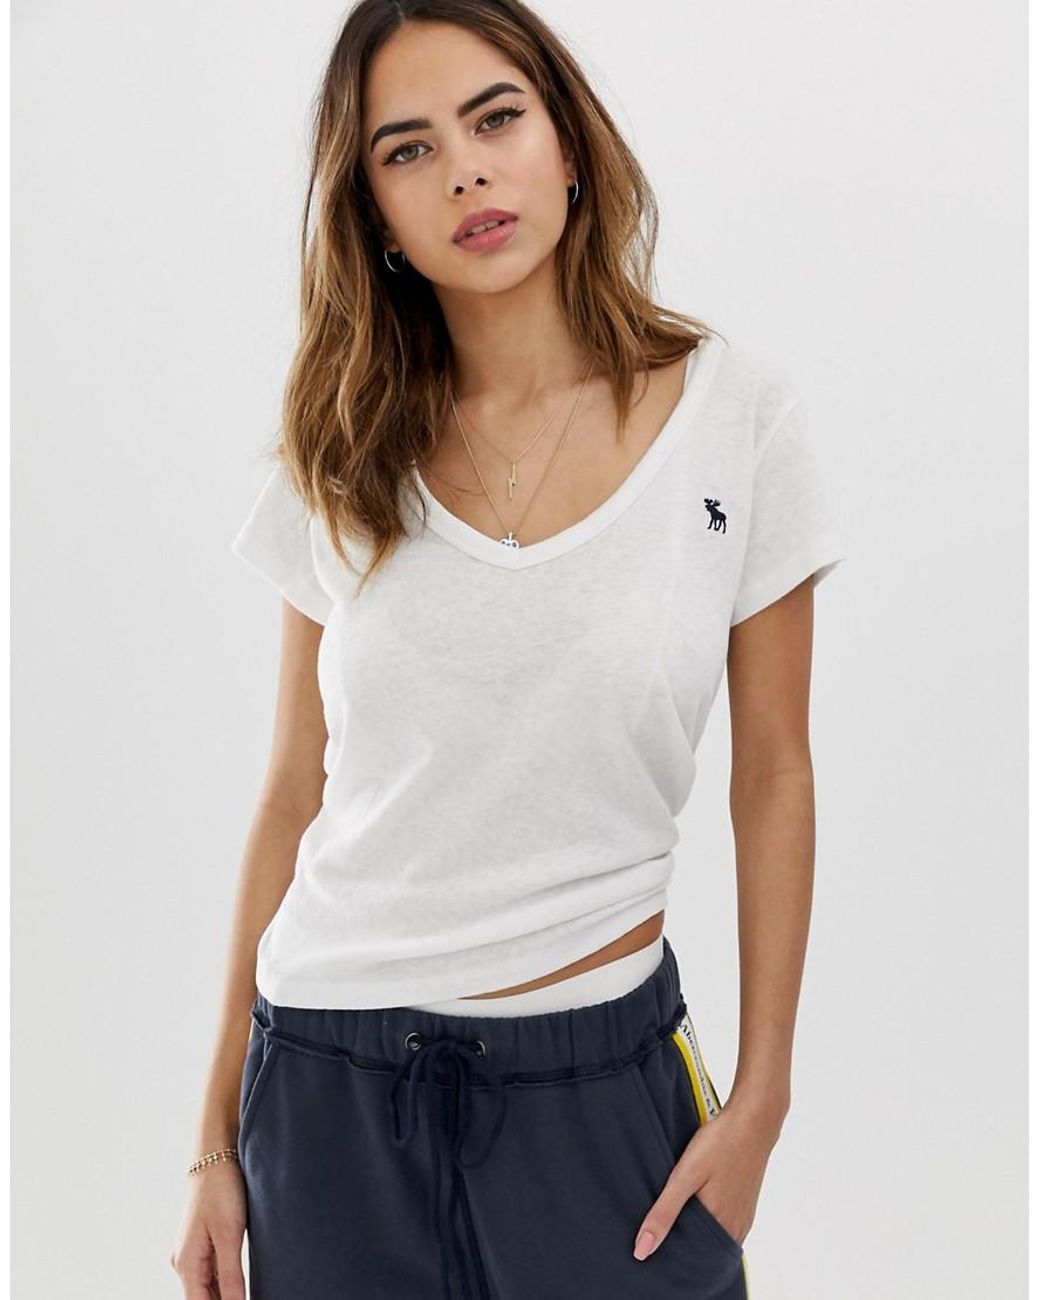 Abercrombie & Fitch Deep V Neck T-shirt in White | Lyst